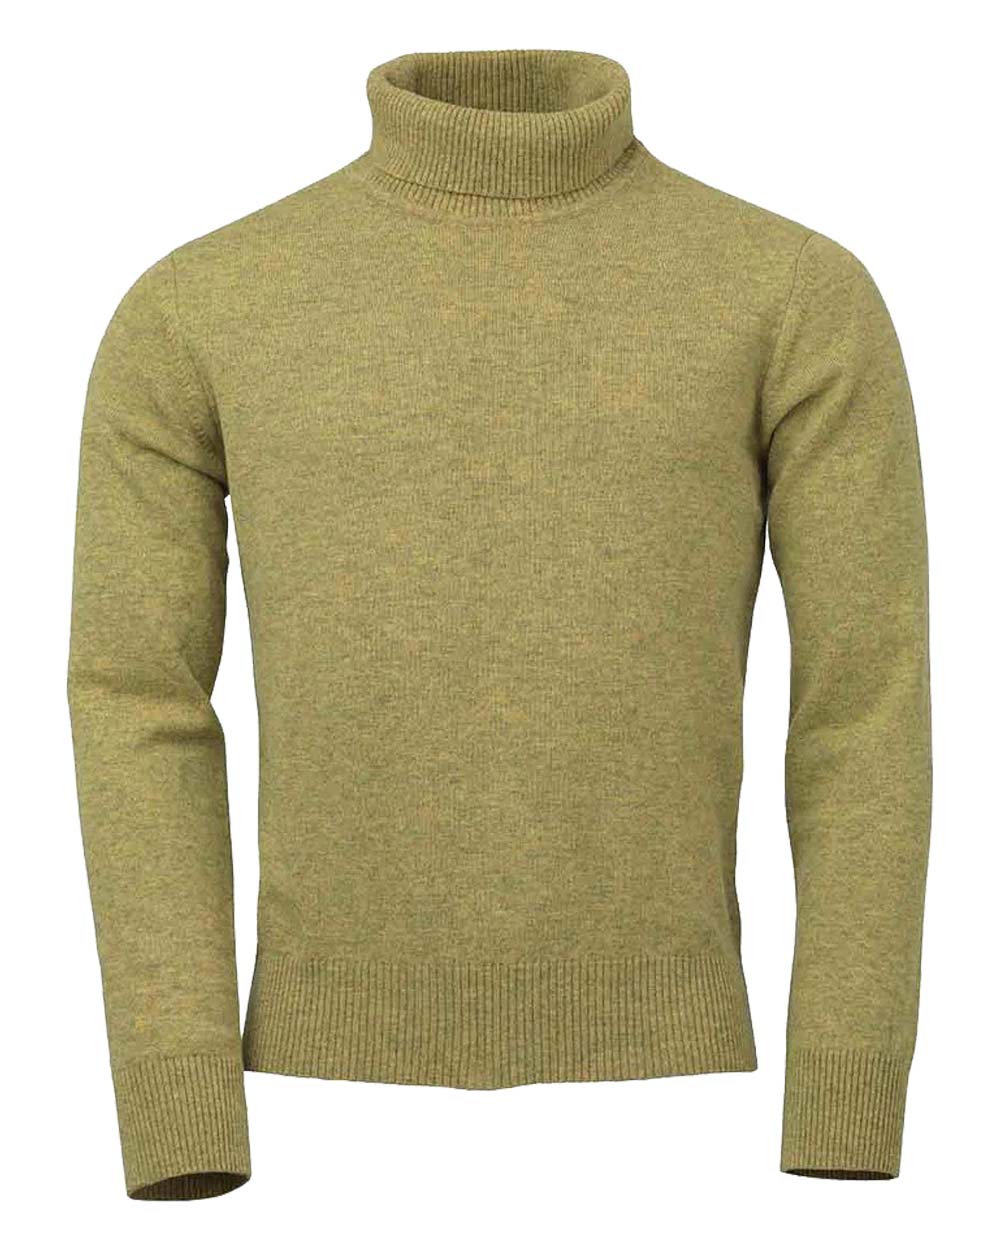 Mustard coloured Laksen Trool Lamswool Rollneck Sweater on White background 